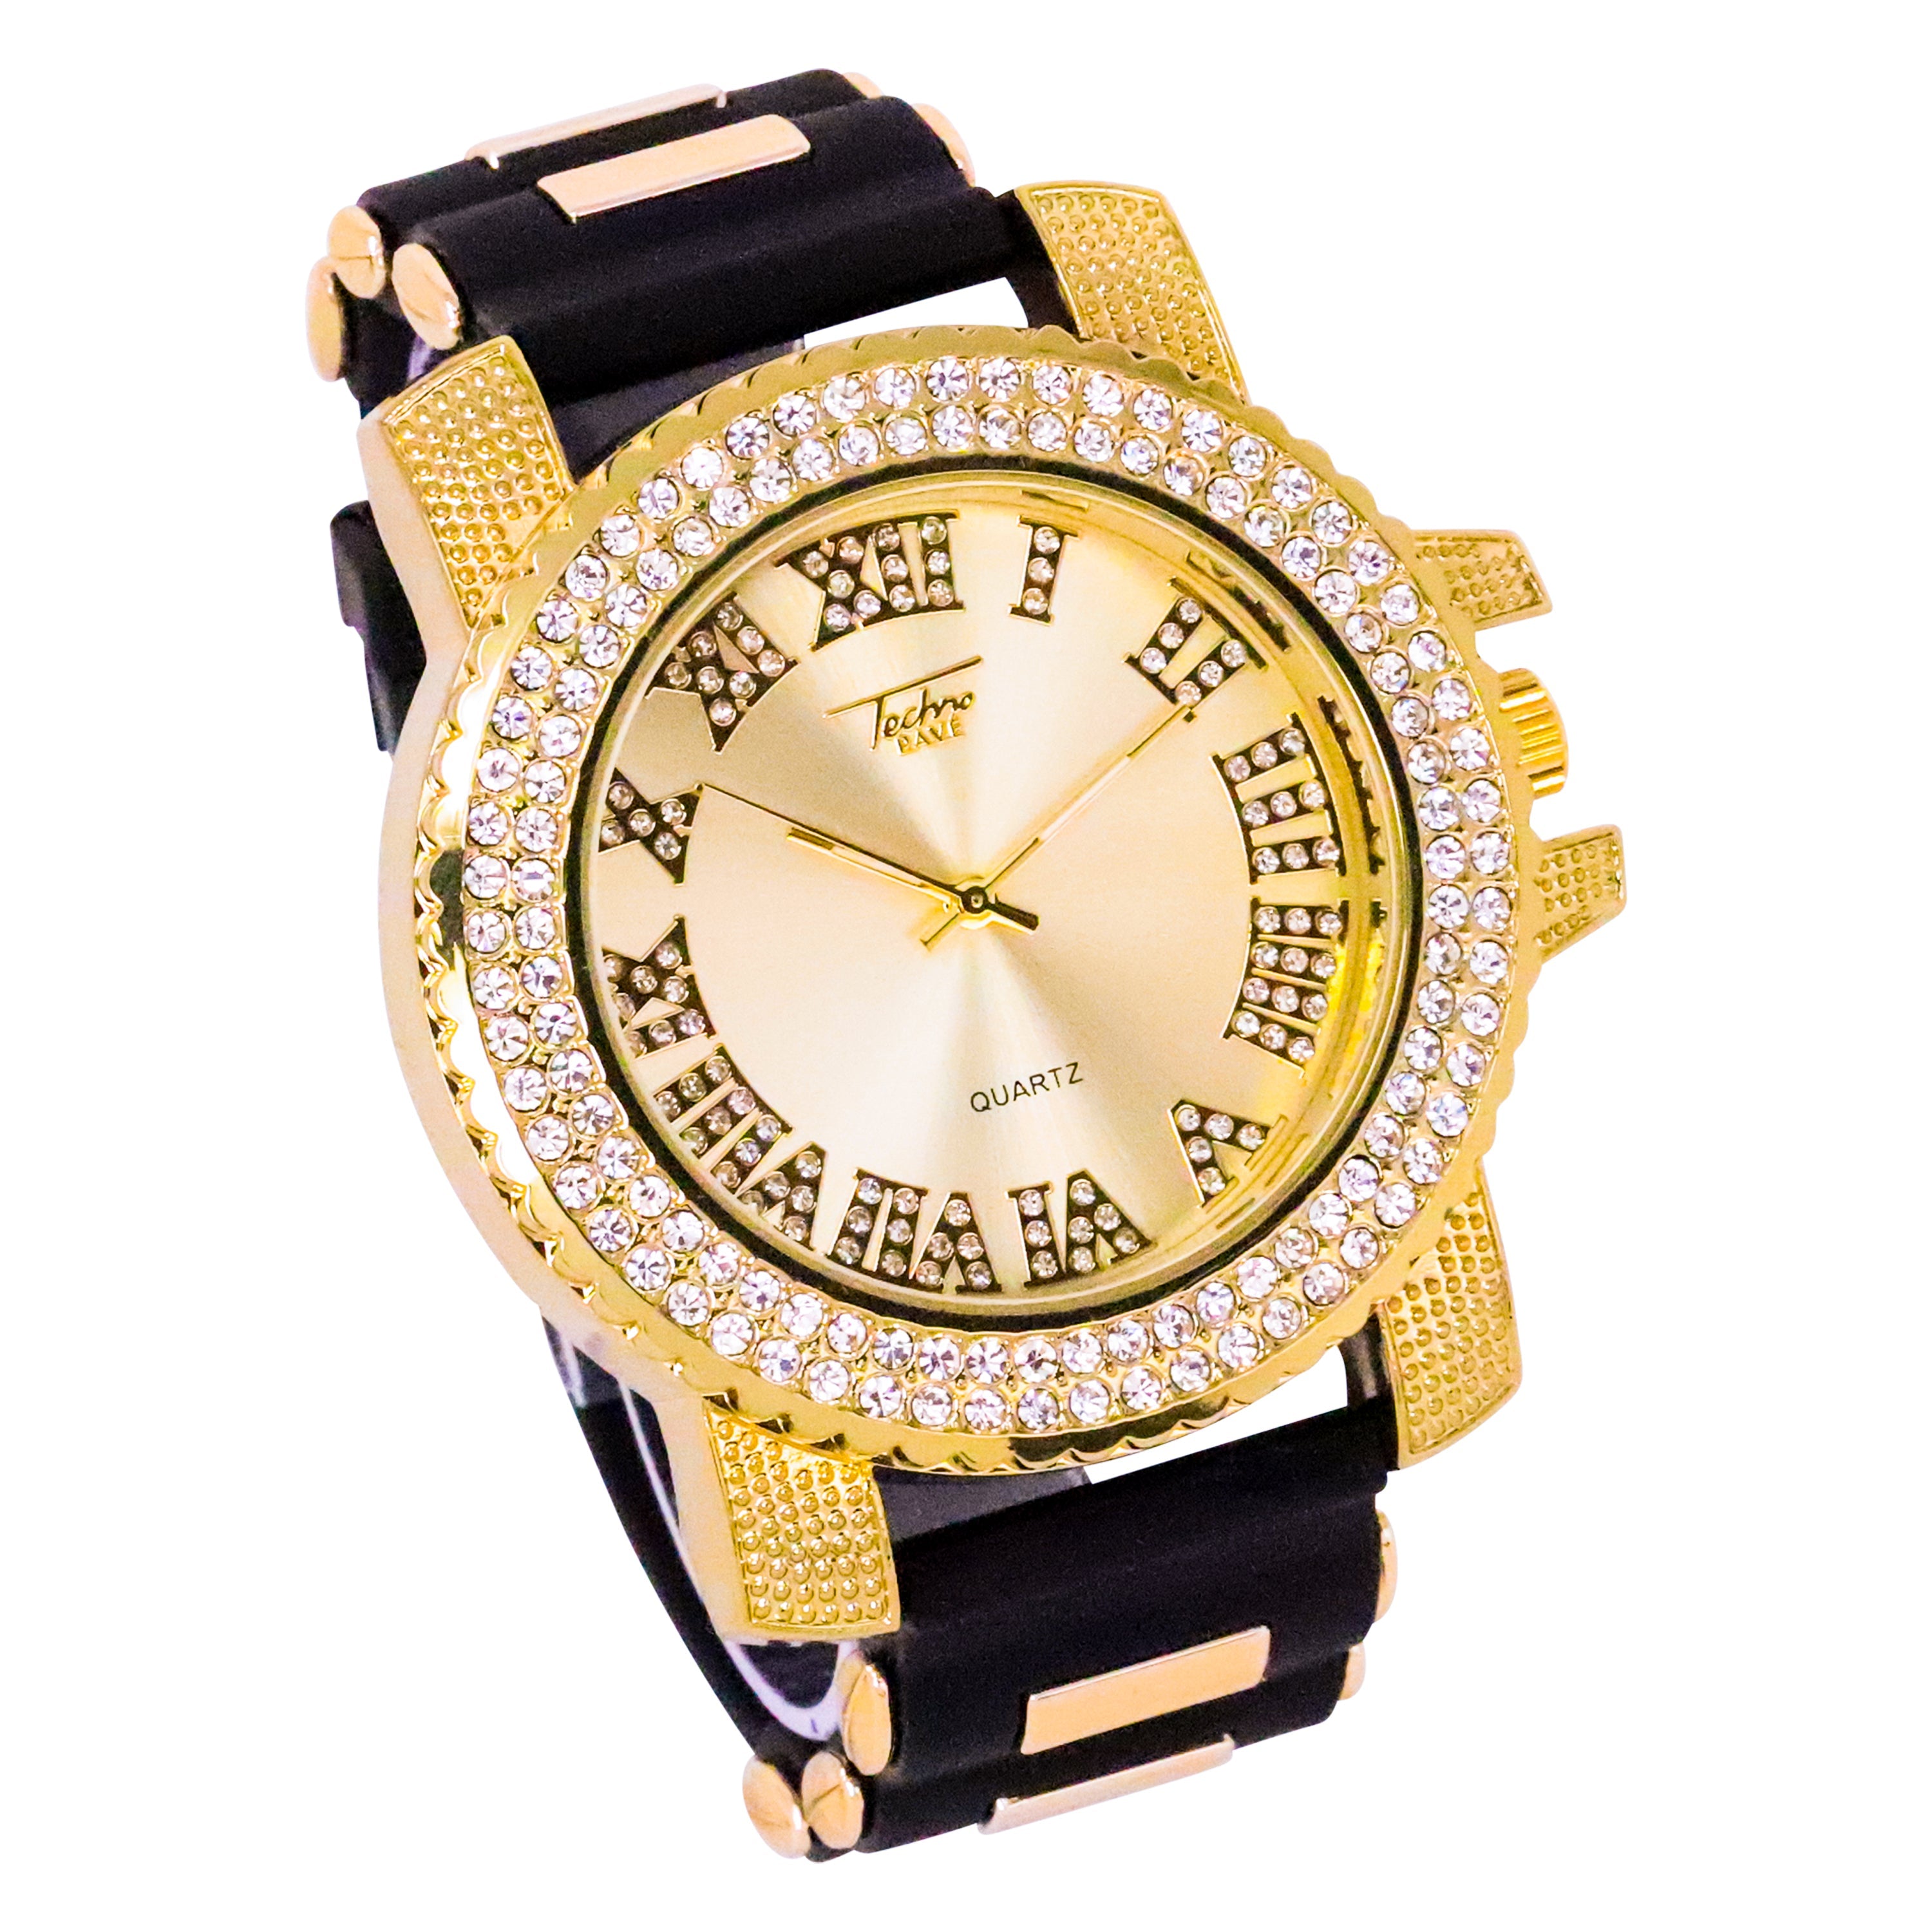 Men's Round Bullet Band Watch 46mm Gold - Roman Dial